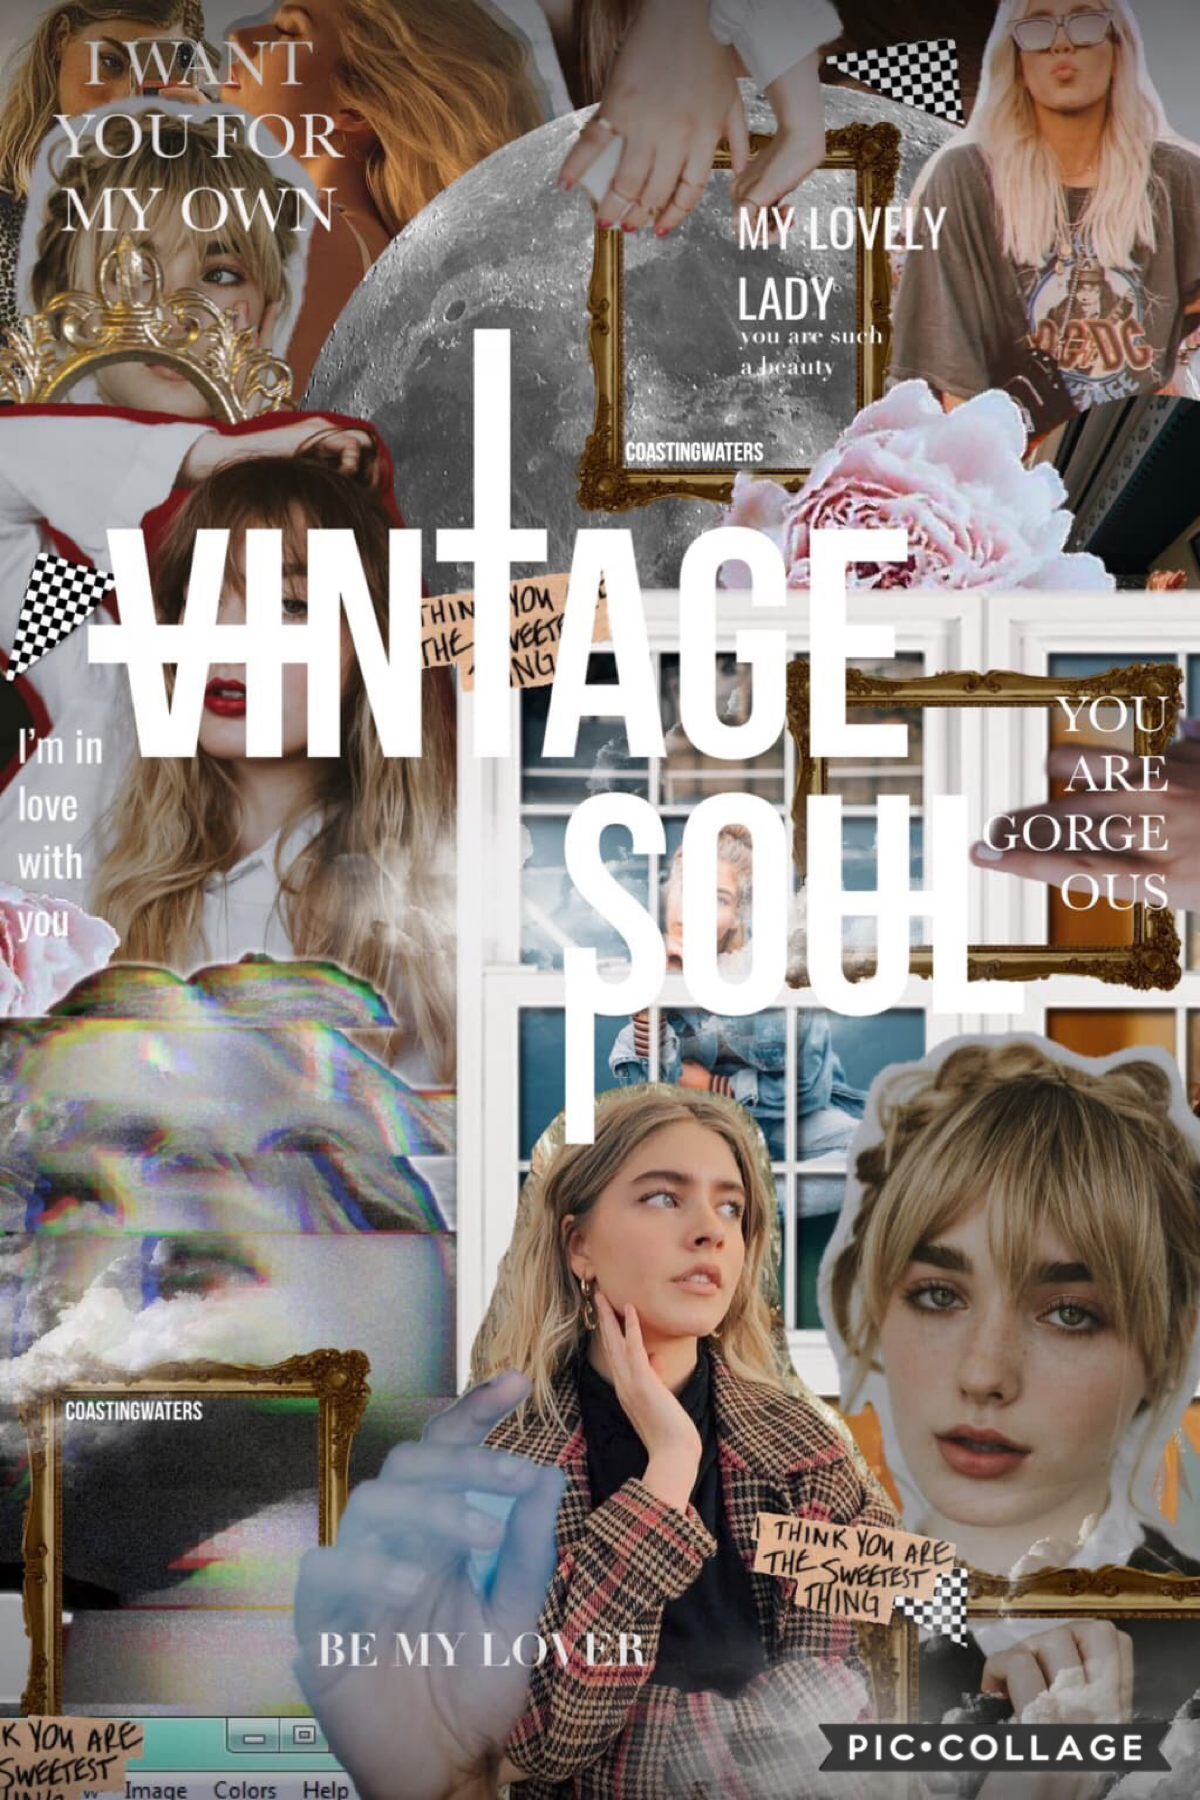 💍 euph0ria 💍
Vintage soul 😍😍😍 this is my fav collage made by her! Go like it! Follow her! Like all her collages! 